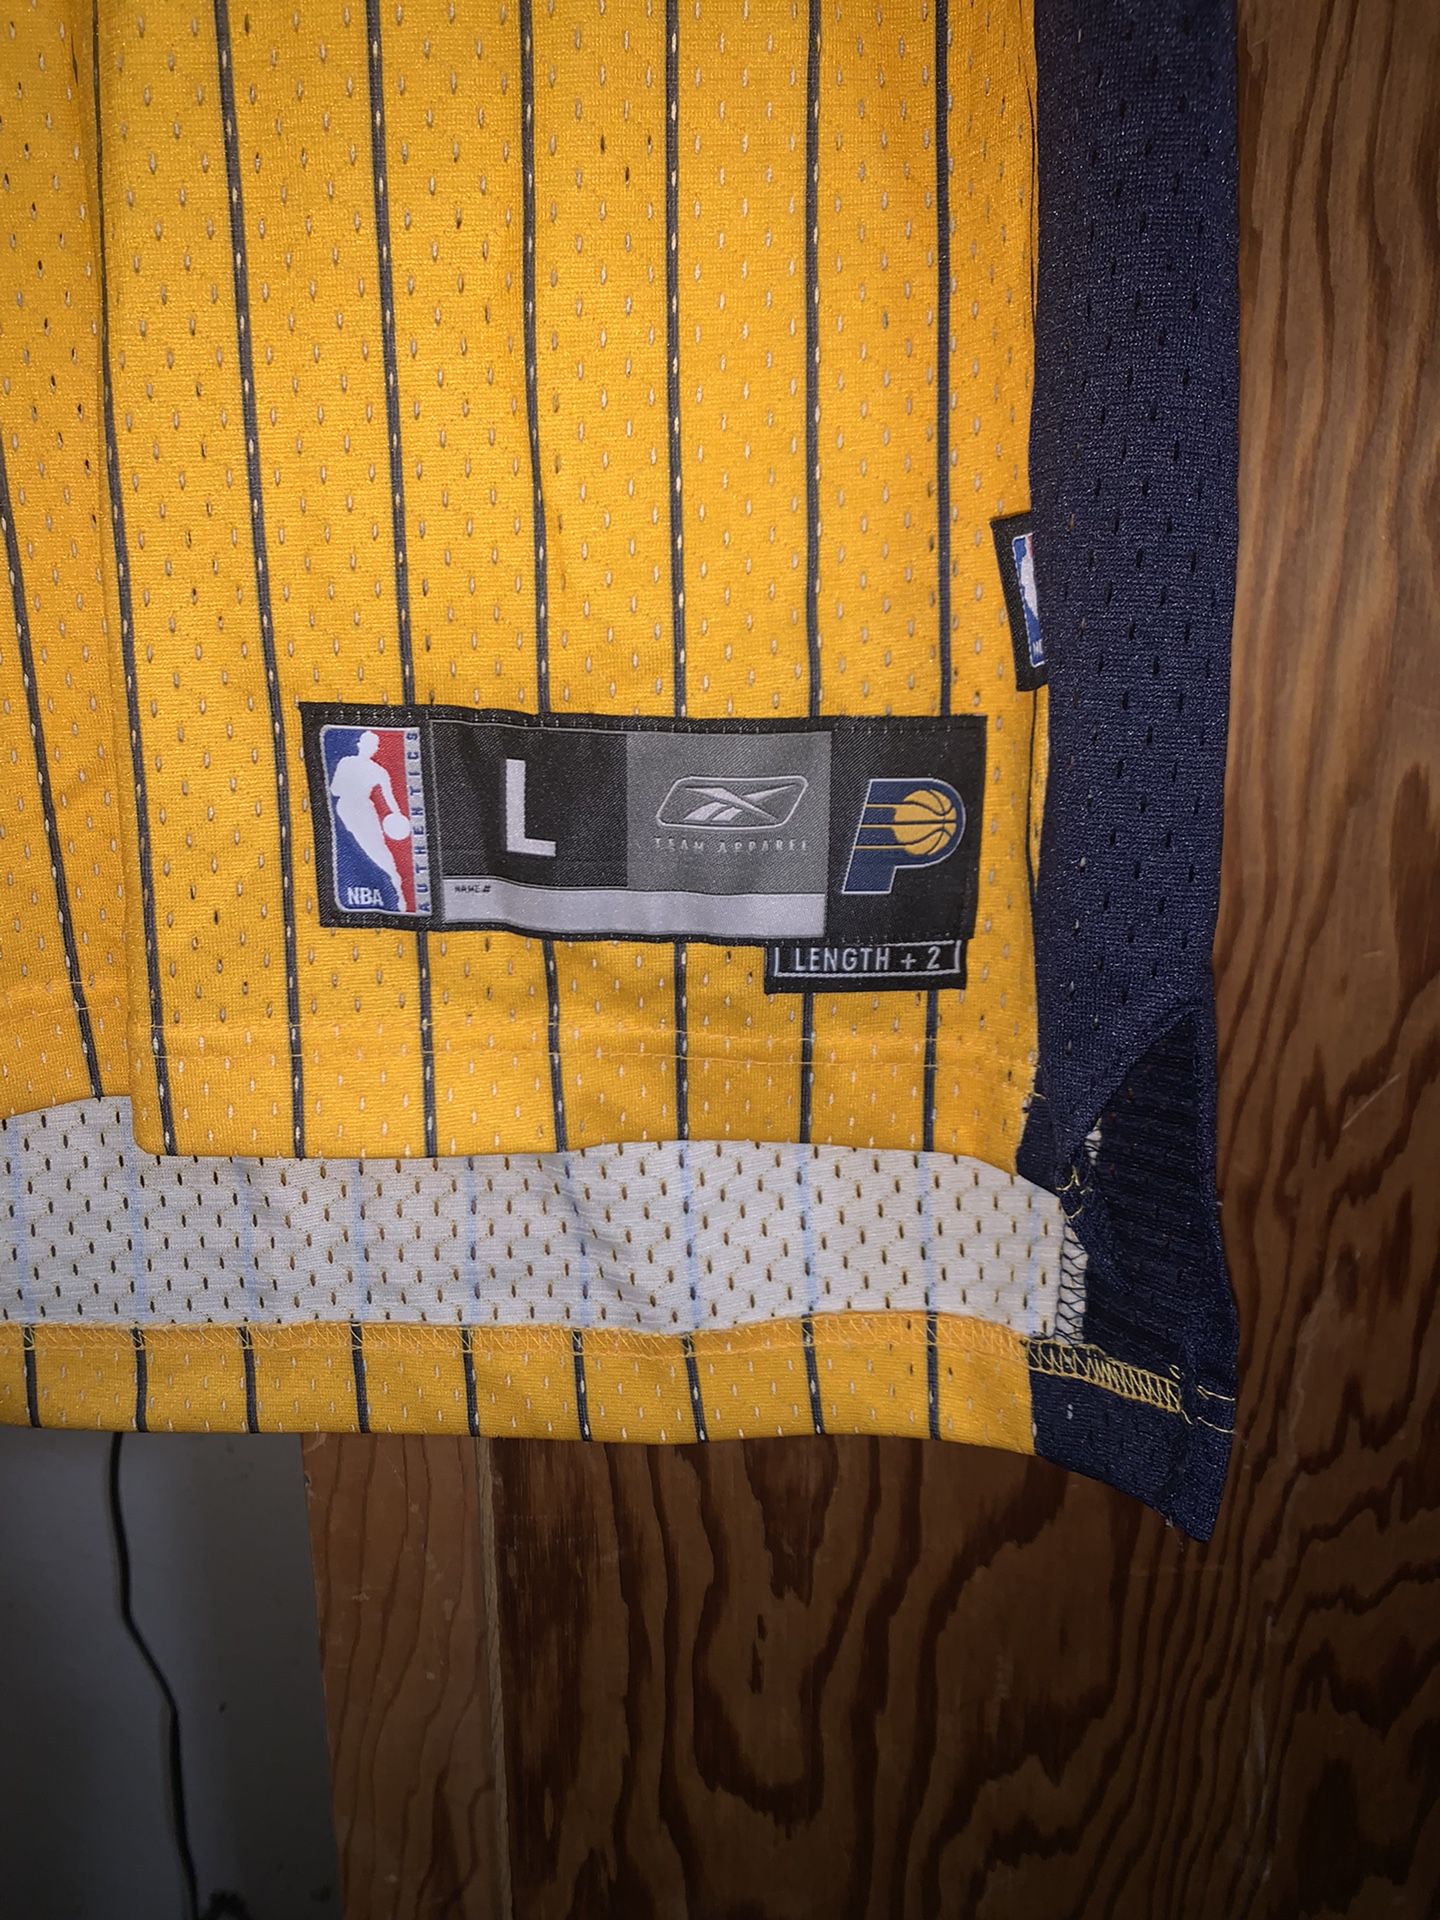 Ron Artest jersey : r/pacers